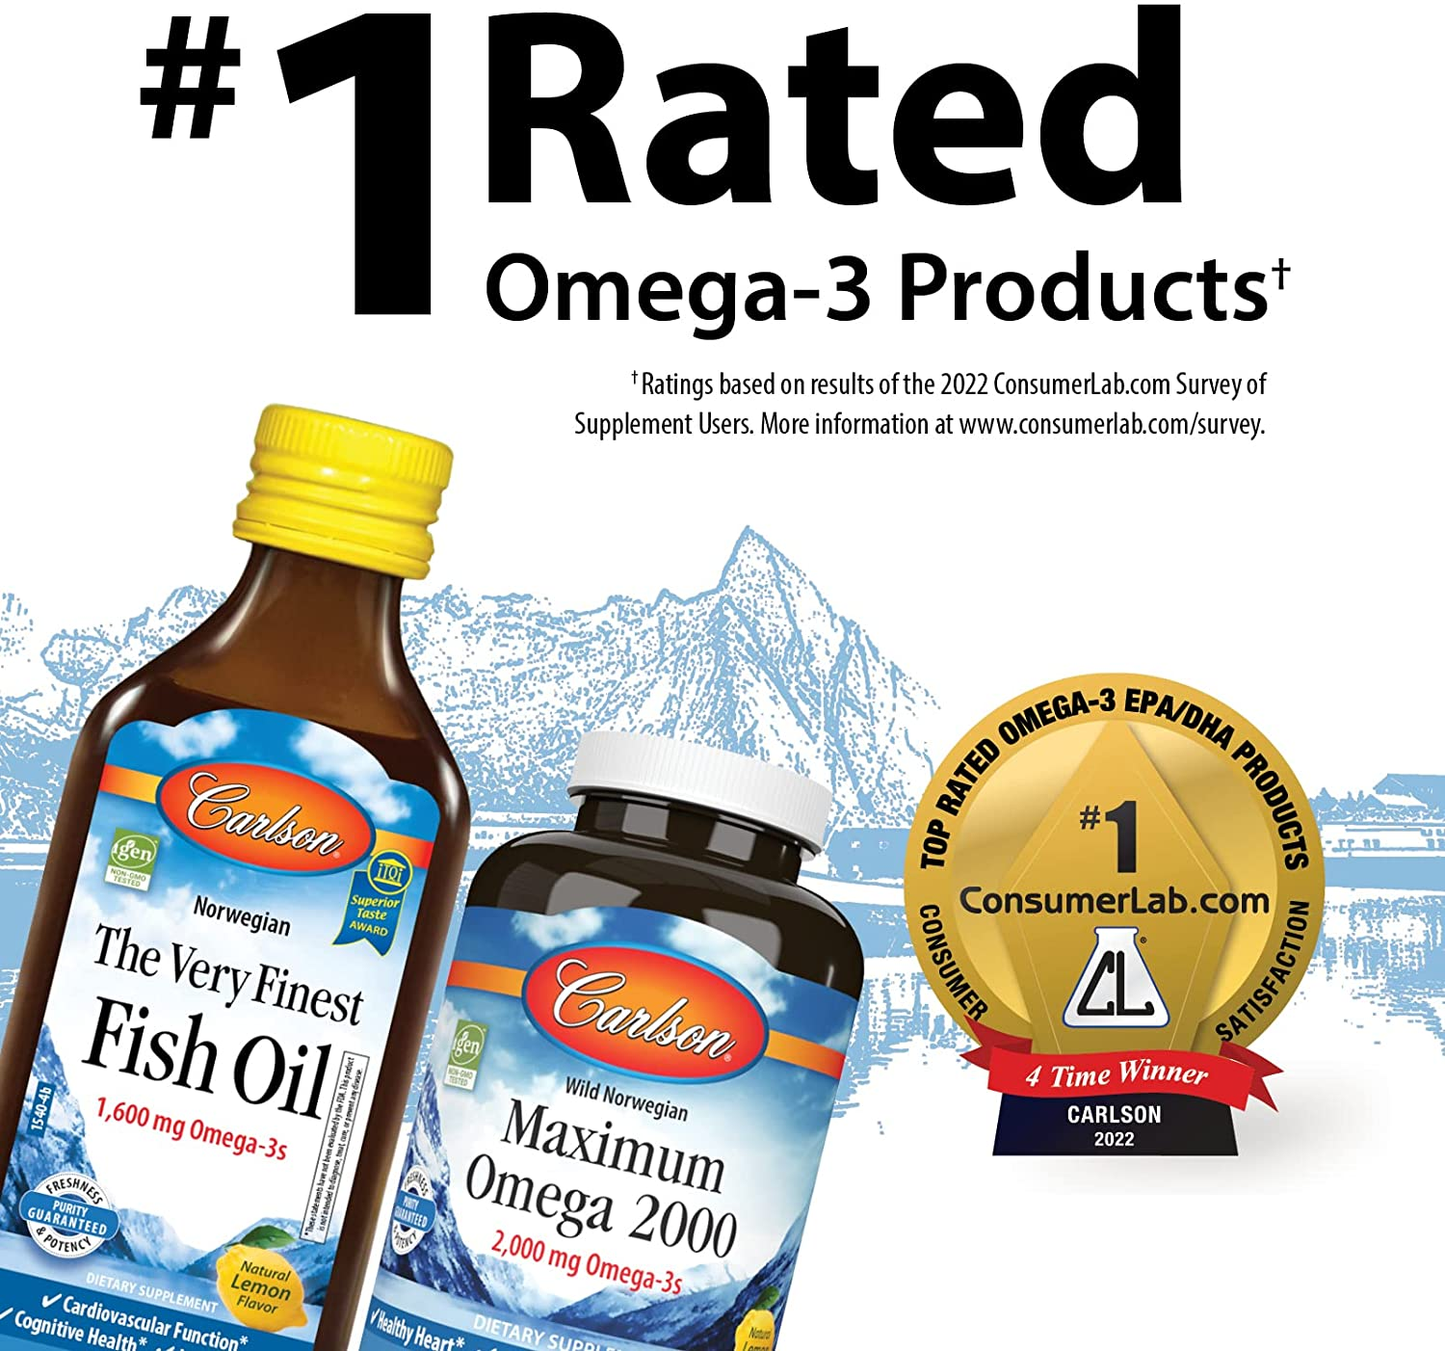 - Cod Liver Oil, 1100 Mg Omega-3S + a & D3, Wild-Caught Norwegian Arctic Cod-Liver Oil, Sustainably Sourced Nordic Fish Oil Liquid, Green Apple, 250 Ml (8.4 Fl Oz)